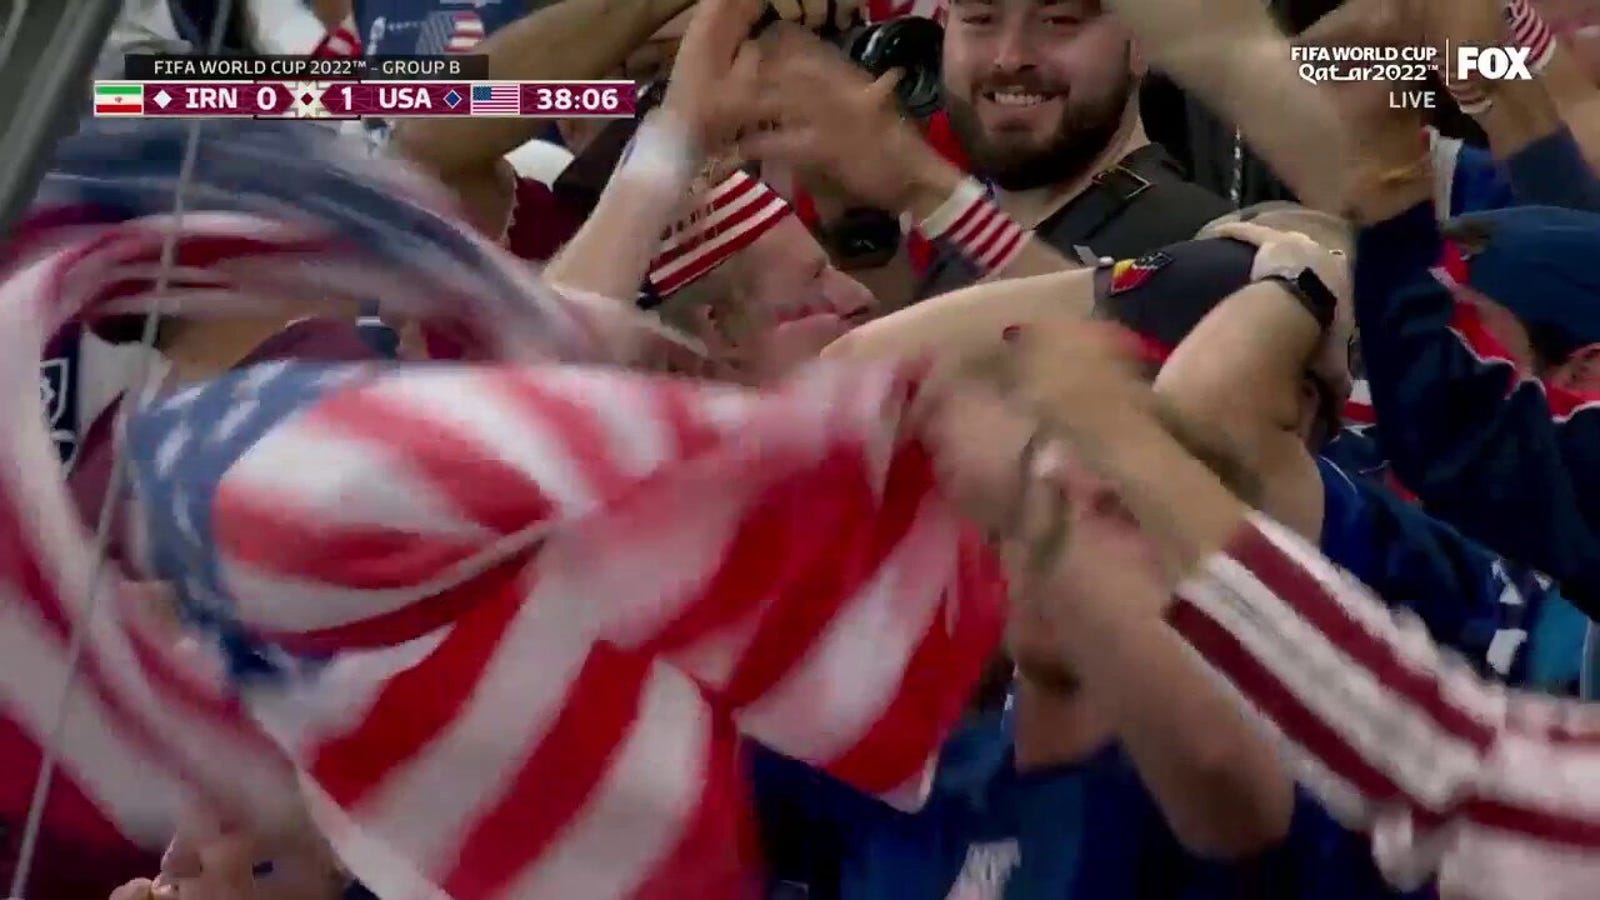 USA's Christian Pulisic scores against Iran in 38'. 